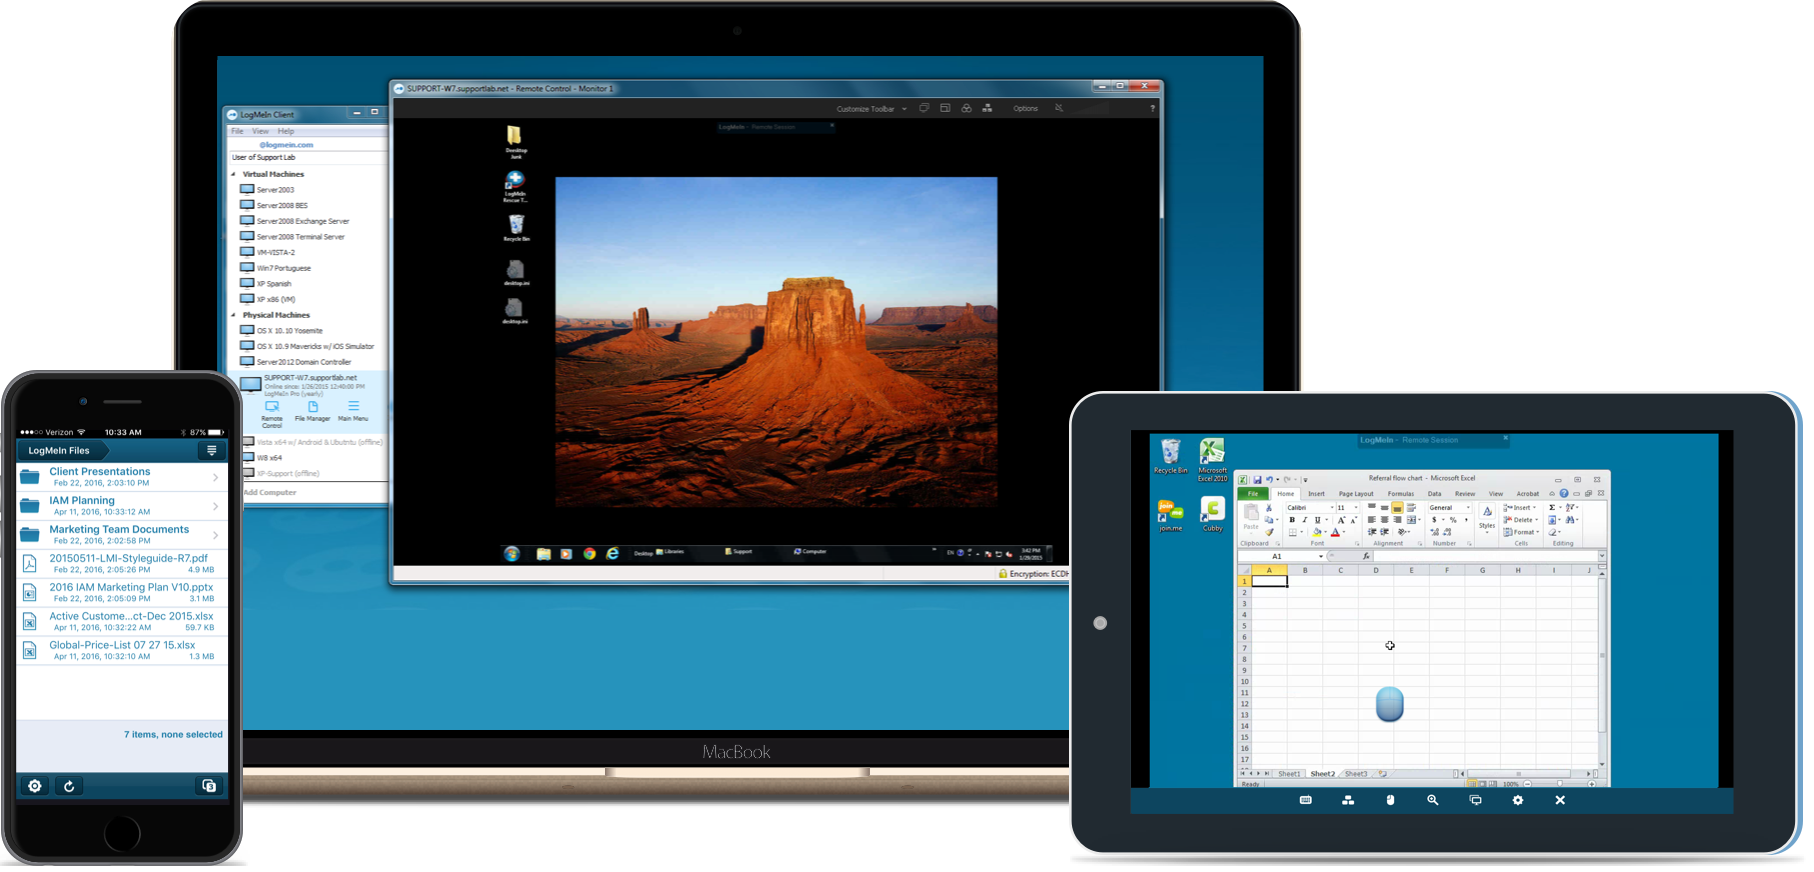 LogMeIn Pro Software - Get anytime, anywhere access to any PC or Mac via a desktop, iOS or Android device